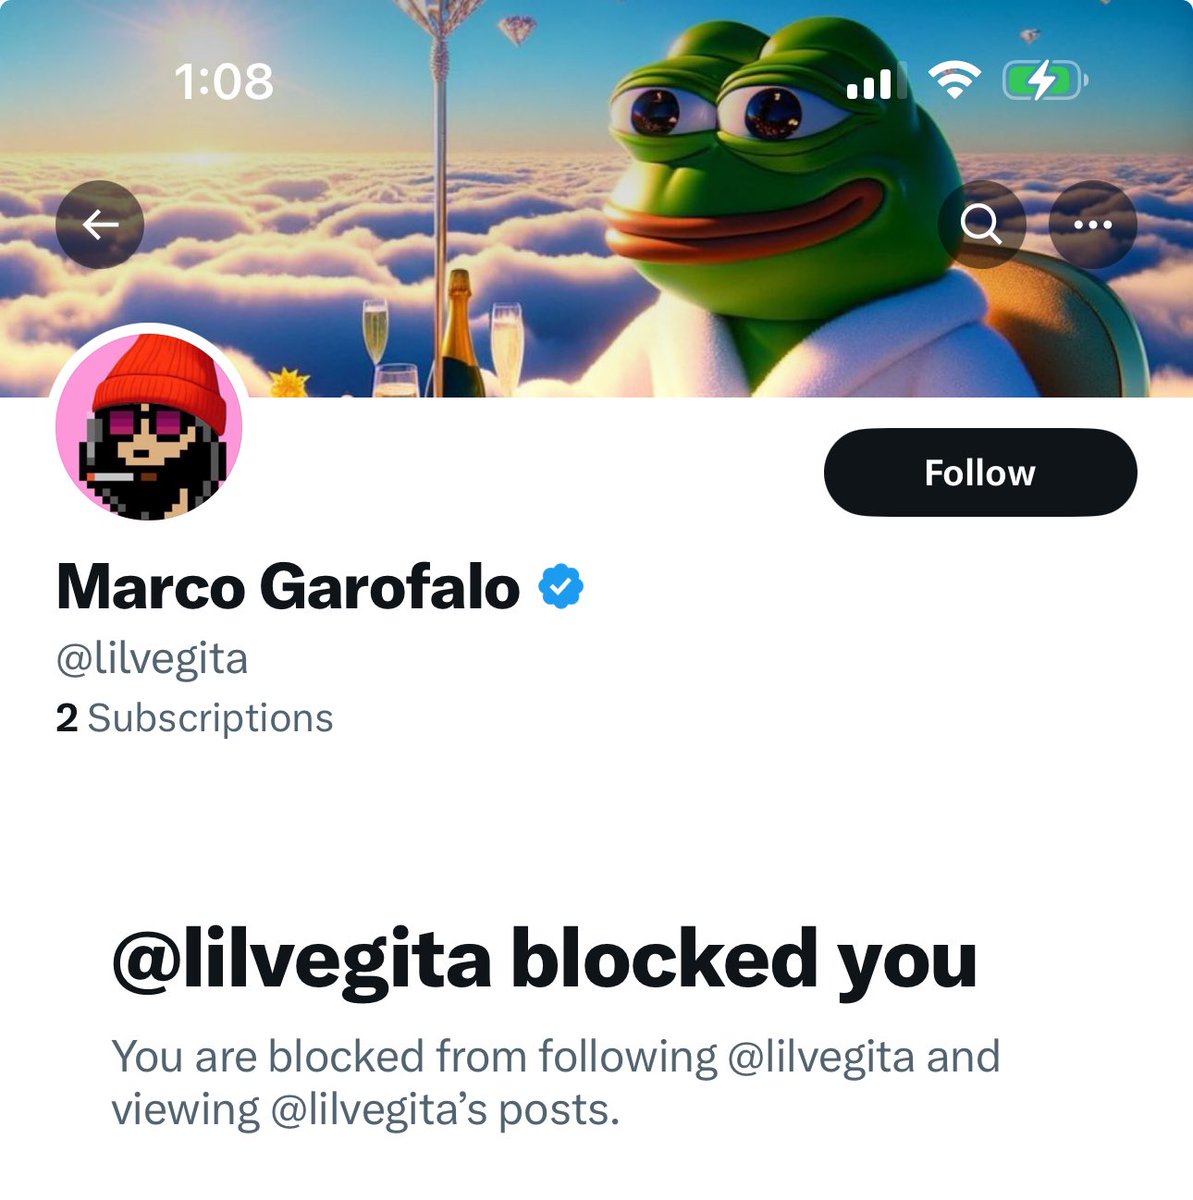 See what this scammer just did 

He has blocked me cause am asking for why he launched new token since he has one just rugged it 

Take care guys he will scam all of you 

#babyGummyPepePork69420wifhat
#PORKWIFHAT 

@lilvegita